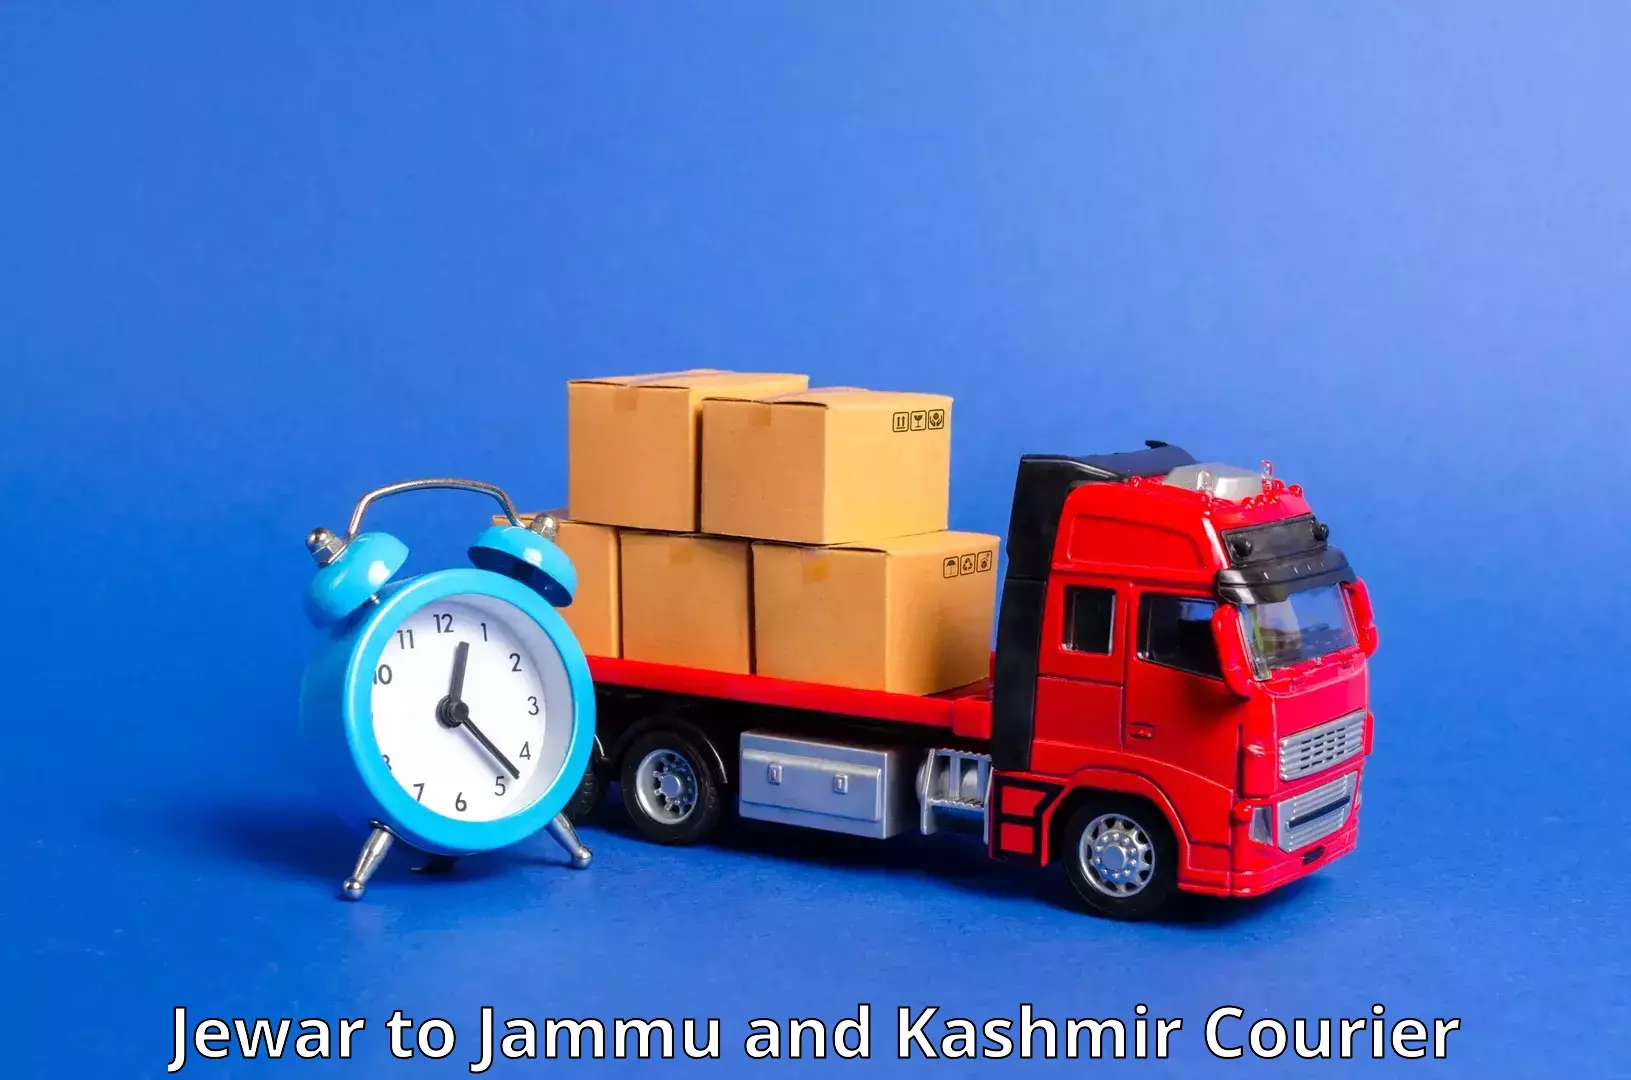 State-of-the-art courier technology Jewar to Bohri